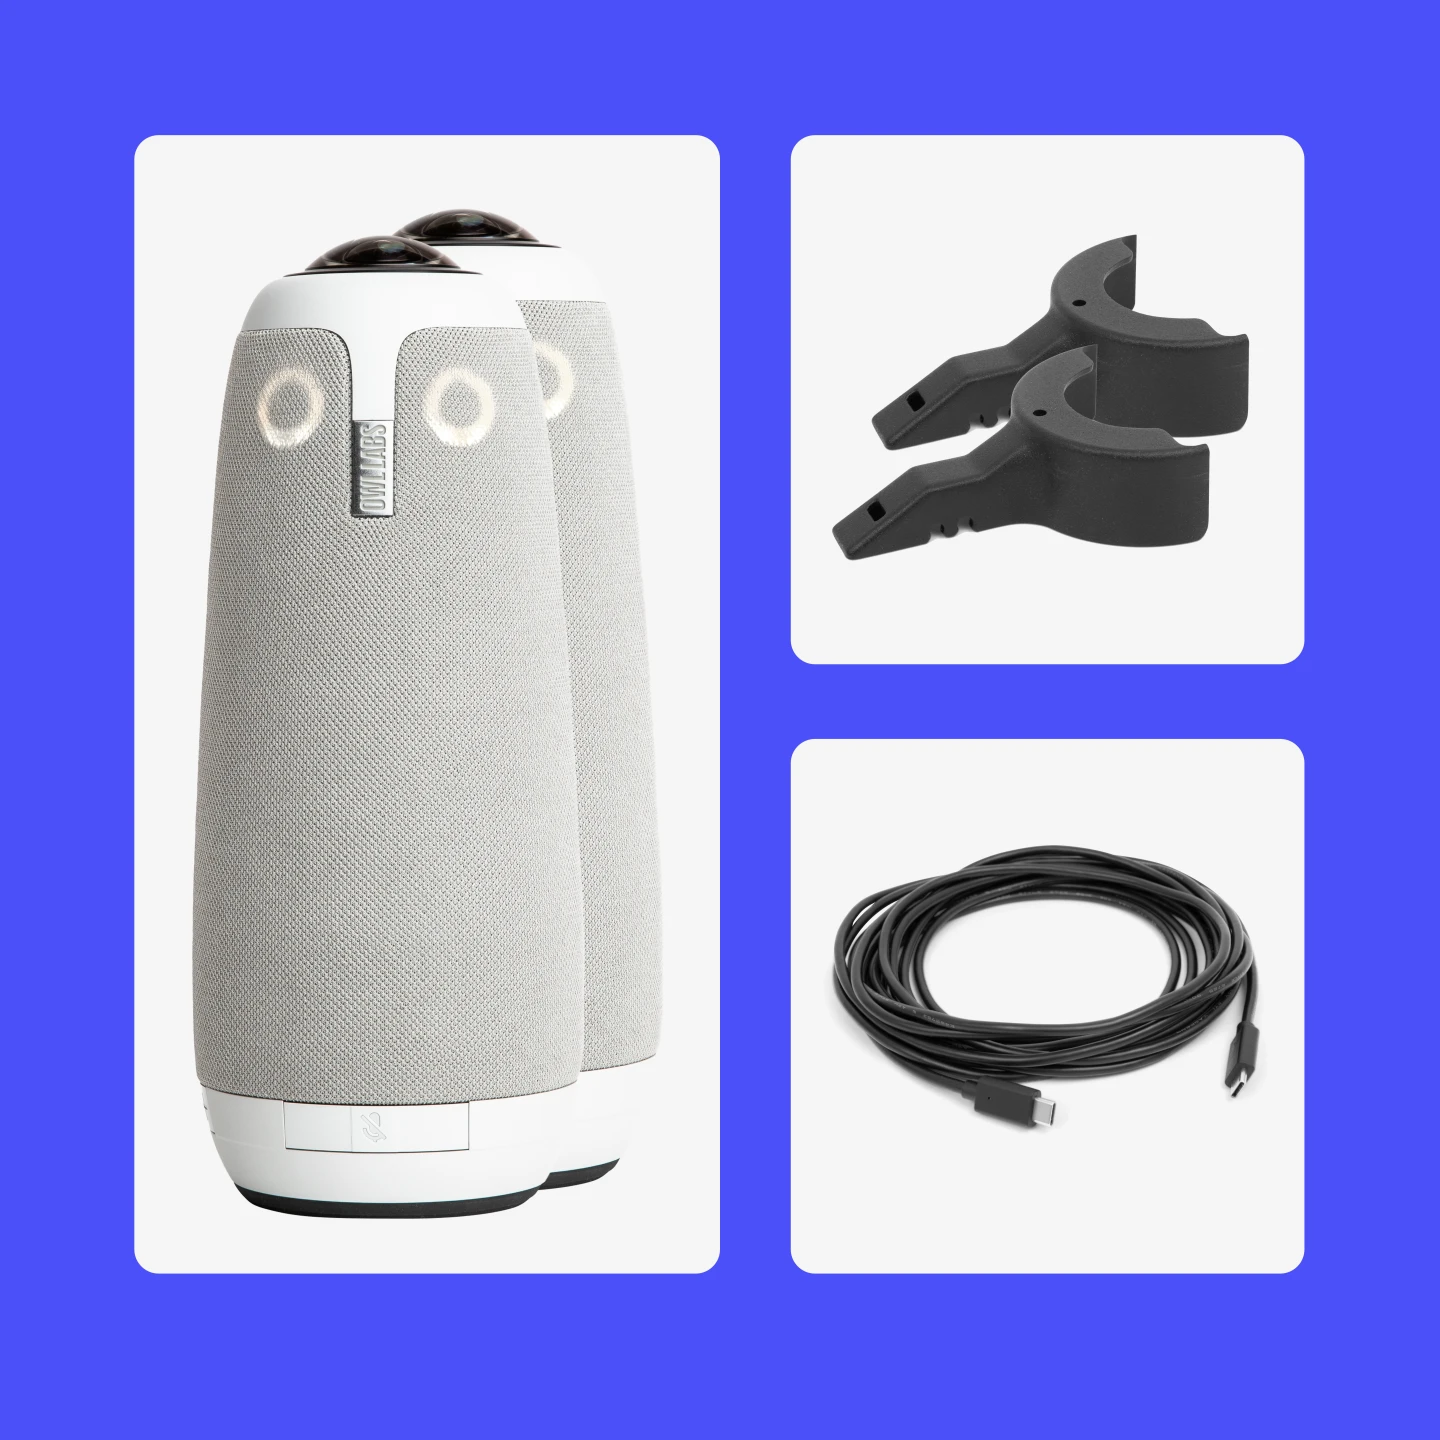 undertrykkeren barndom skyld 2 Meeting Owl 3s (Next Generation) 360-Degree, 1080p HD Smart Video  Conference Camera, Microphone, and Speaker (Wireless Pairing to Support  Larger Meeting Spaces)